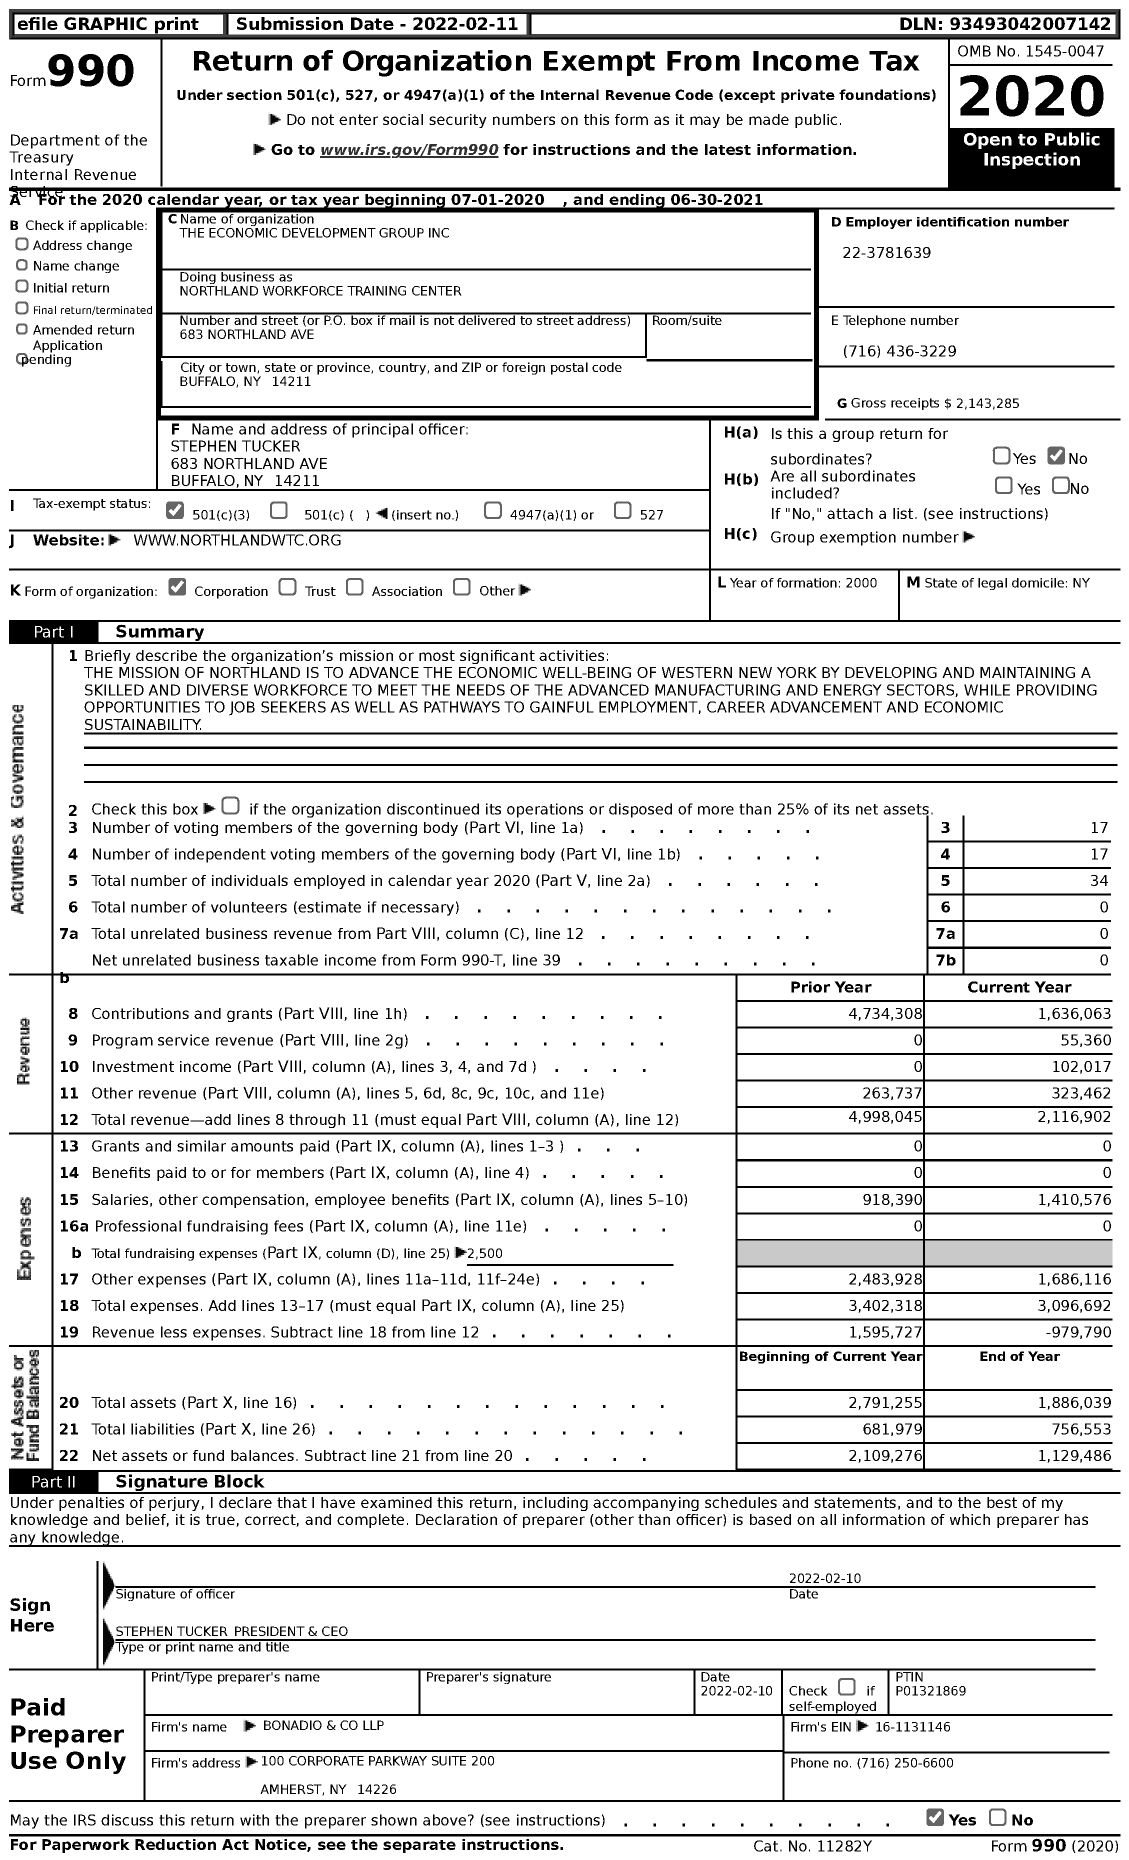 Image of first page of 2020 Form 990 for Northland Workforce Training Center